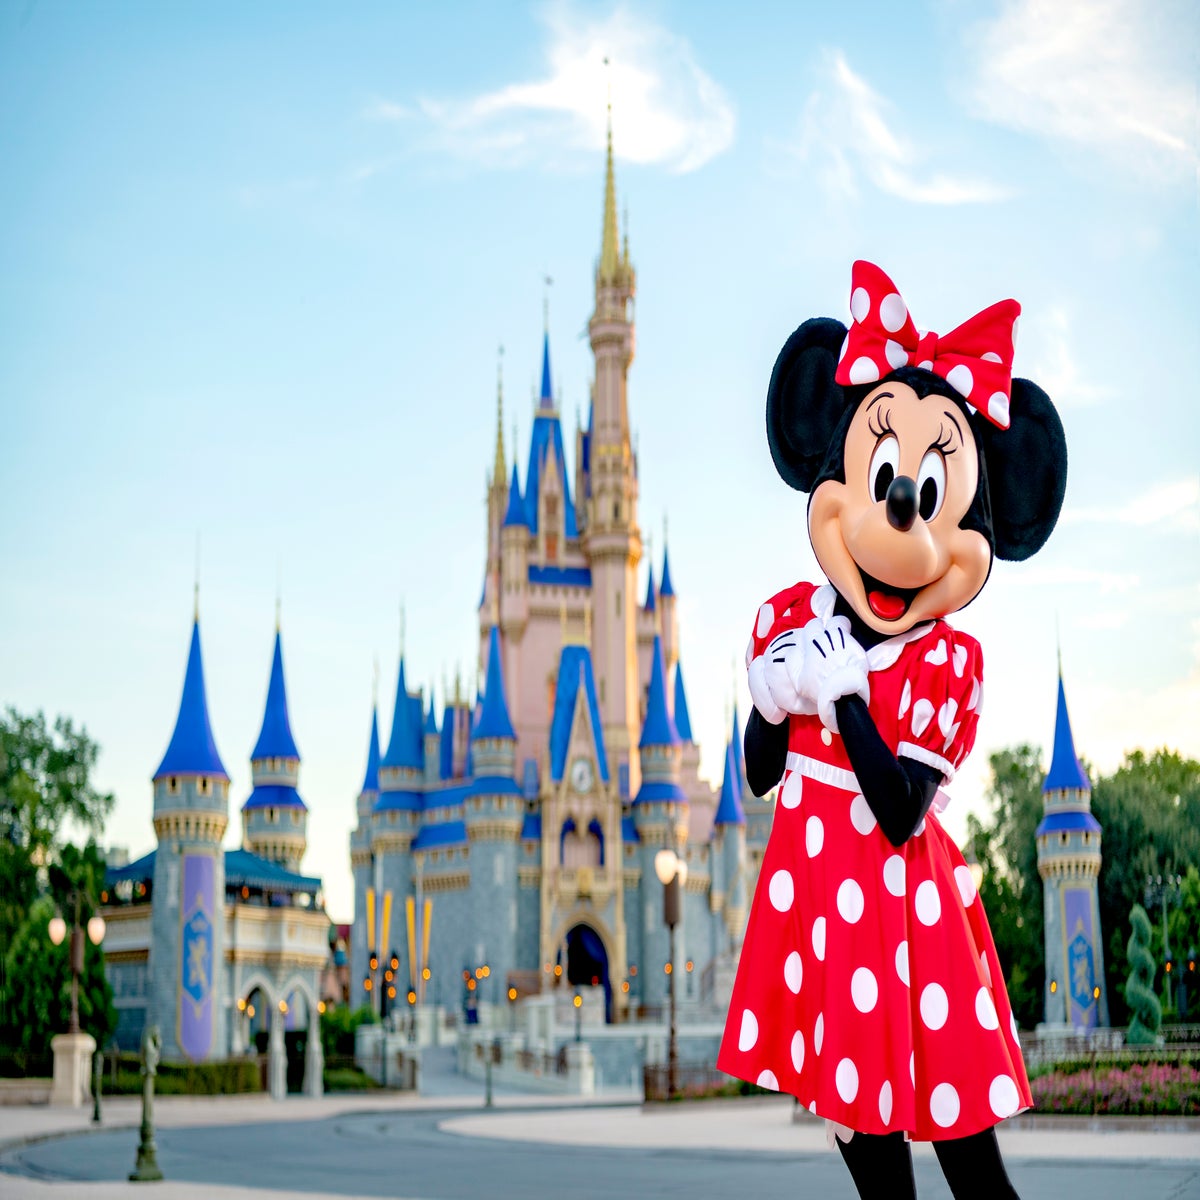 8 Best Theme Parks in Orlando - Orlando Theme Parks - Go Guides